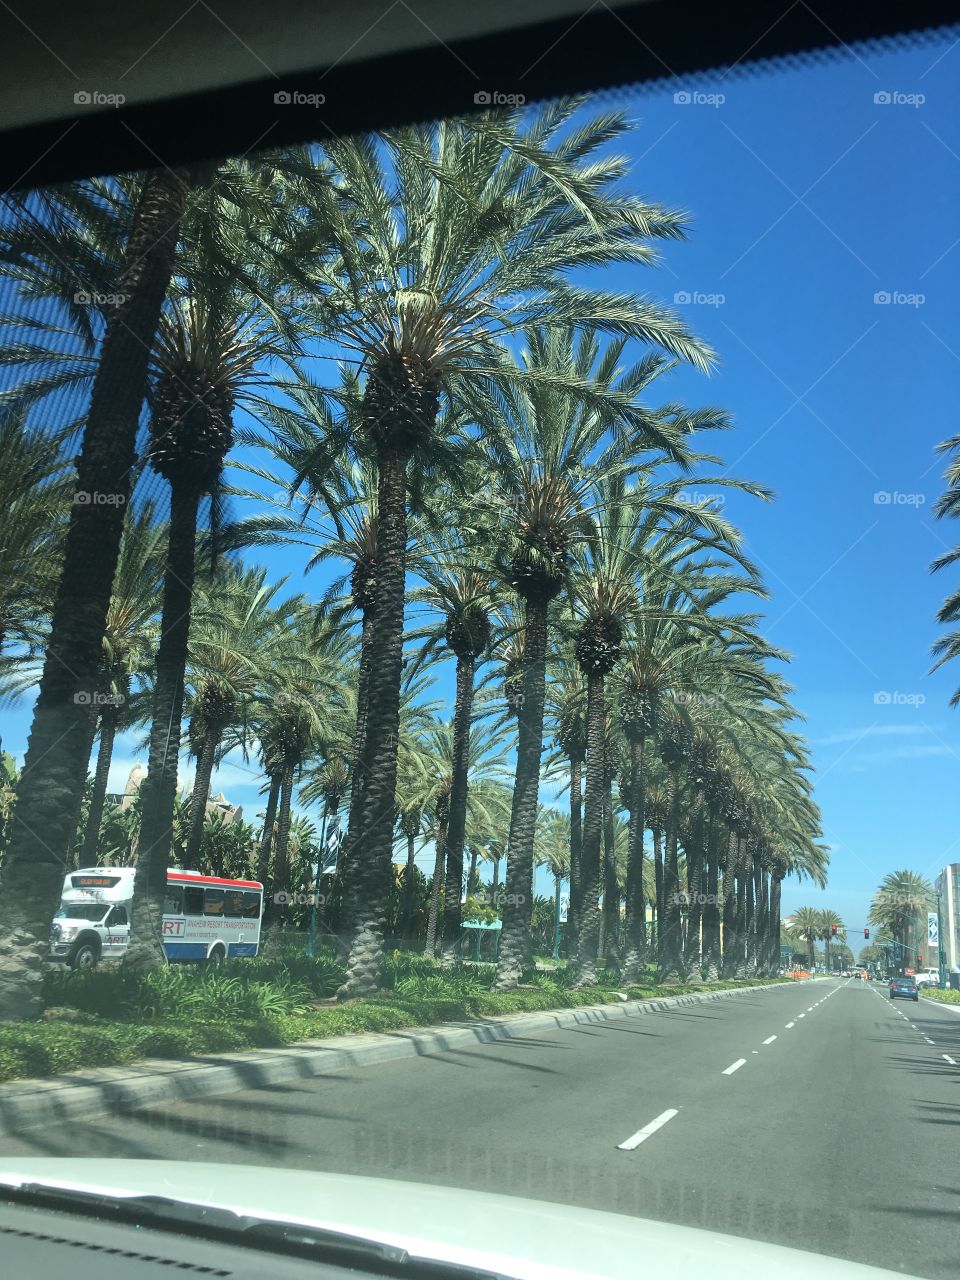 Palm trees lining street in California 